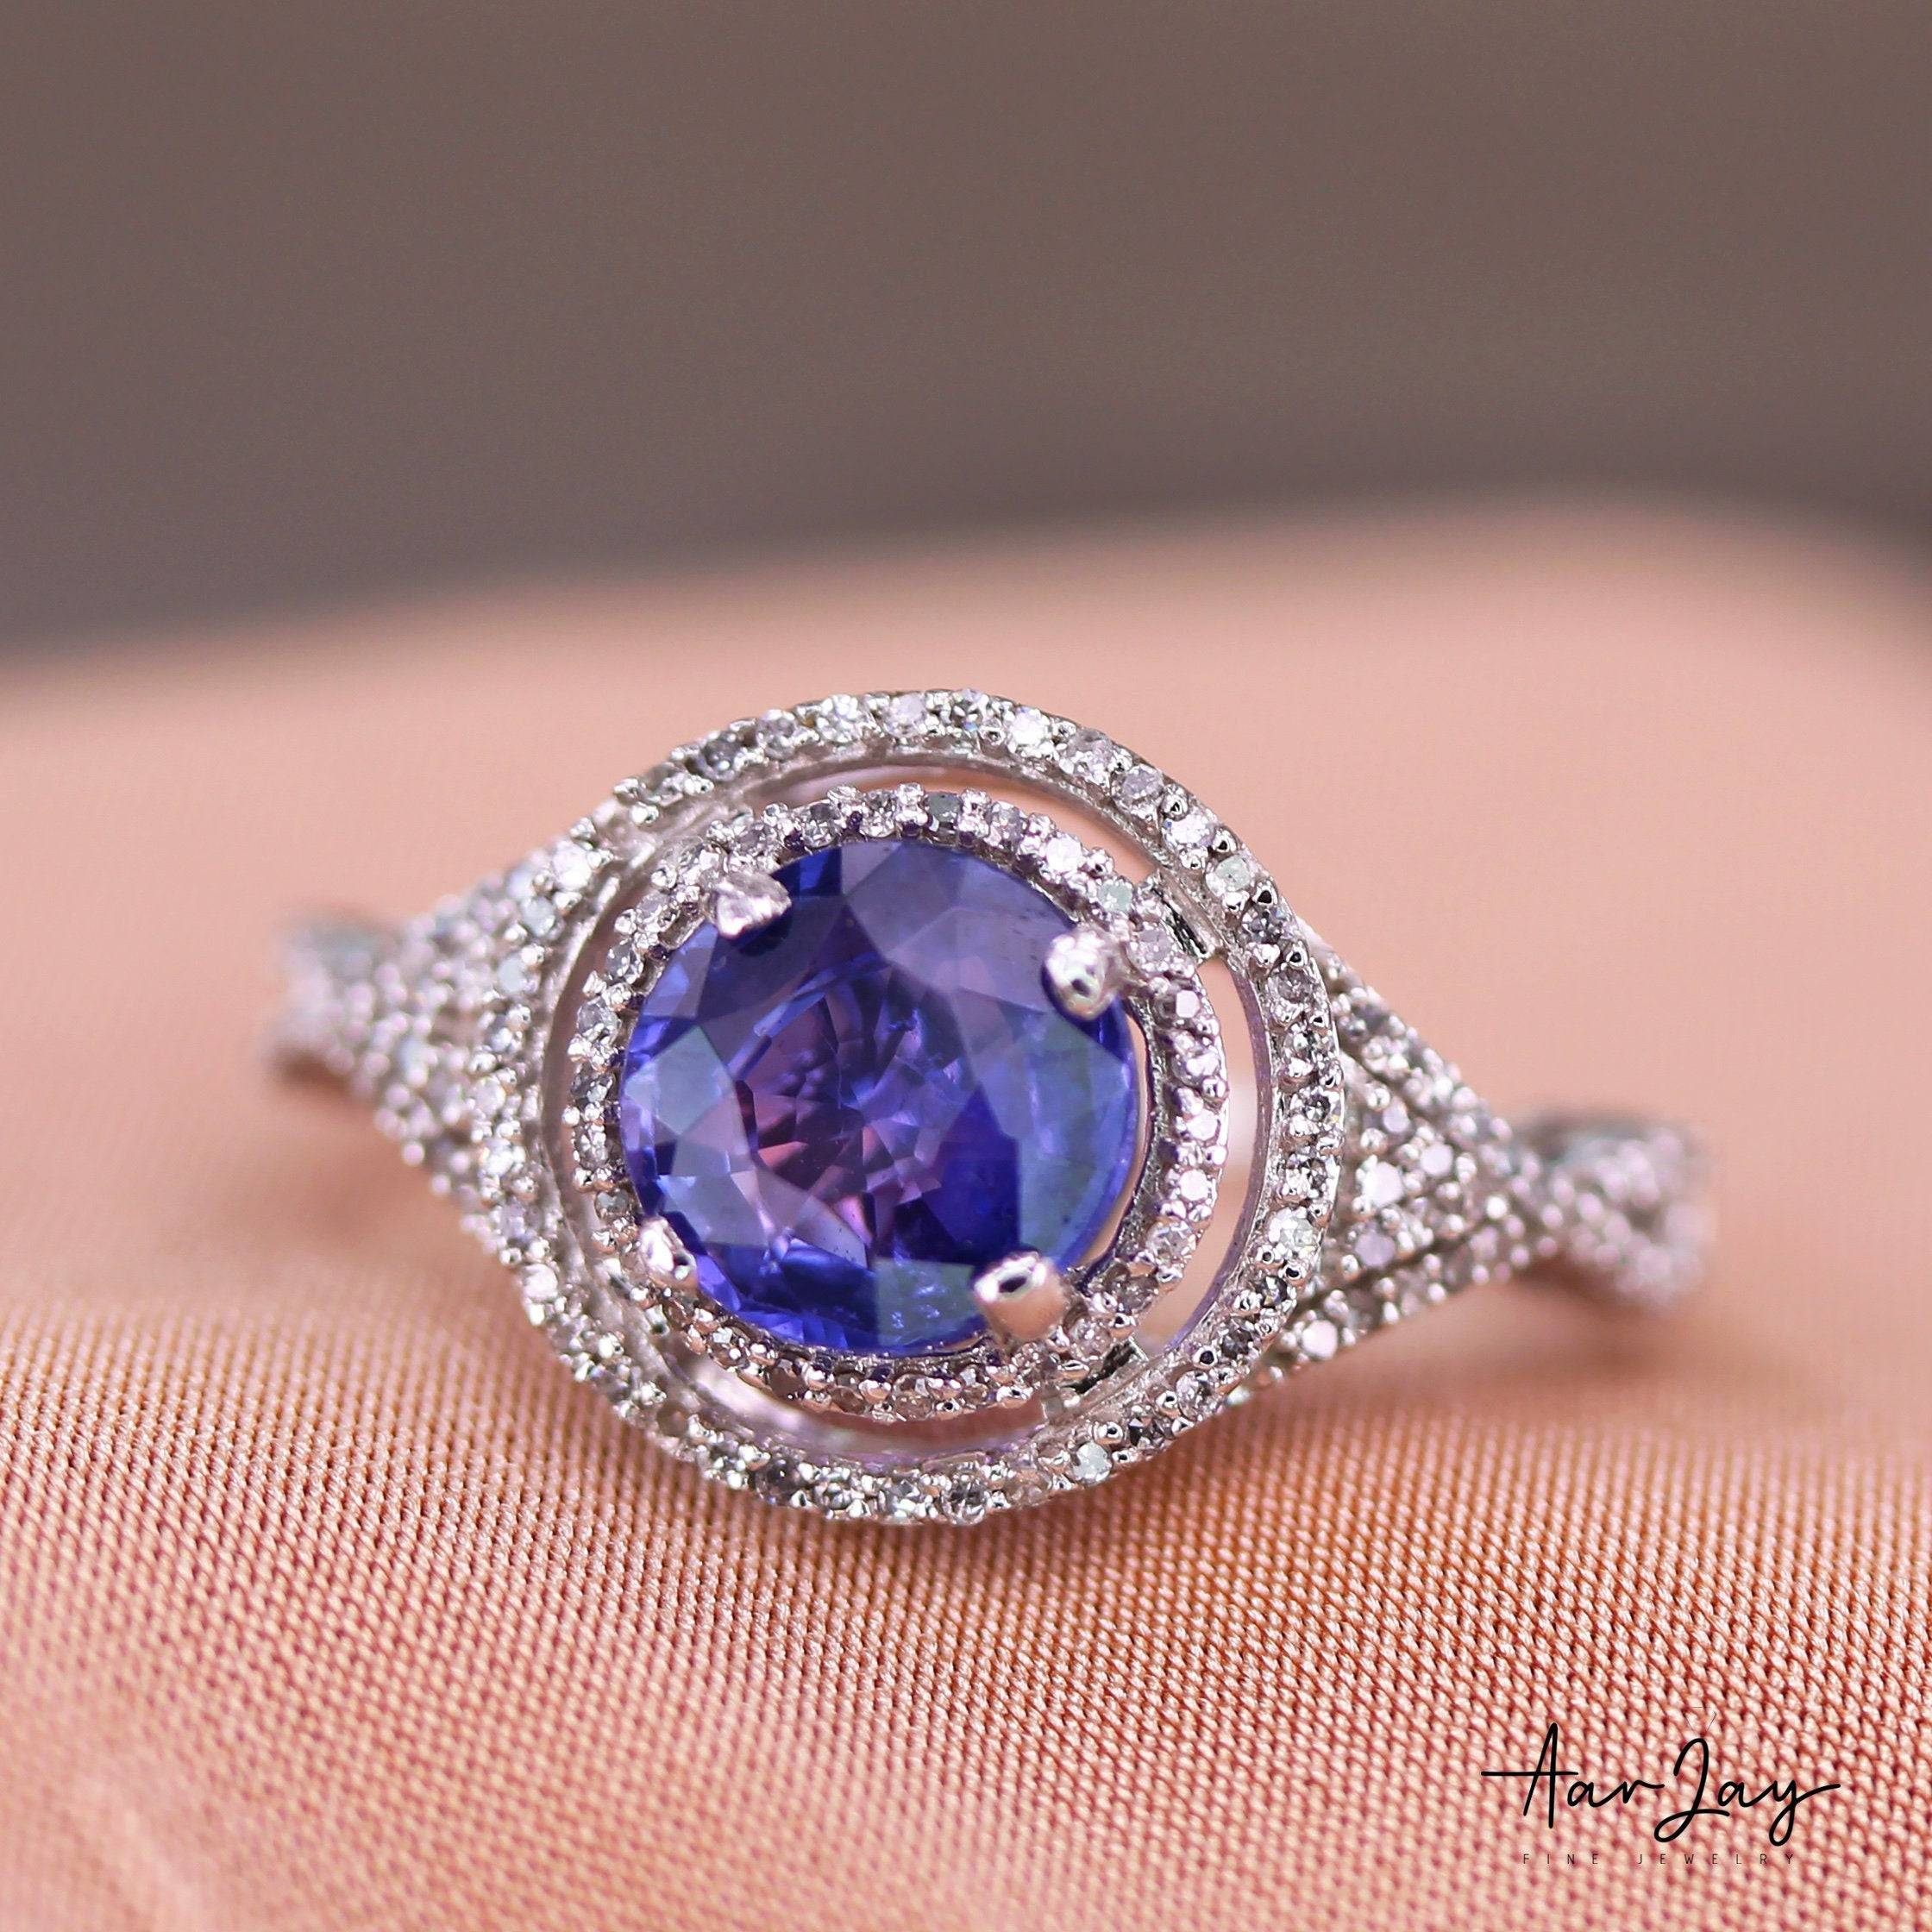 Luxurious Lavender Bliss: 14K White Gold Ring with 2.02 Cts Unheated Sapphire – Elegant Purple Gemstone Delight! - Baza Boutique 